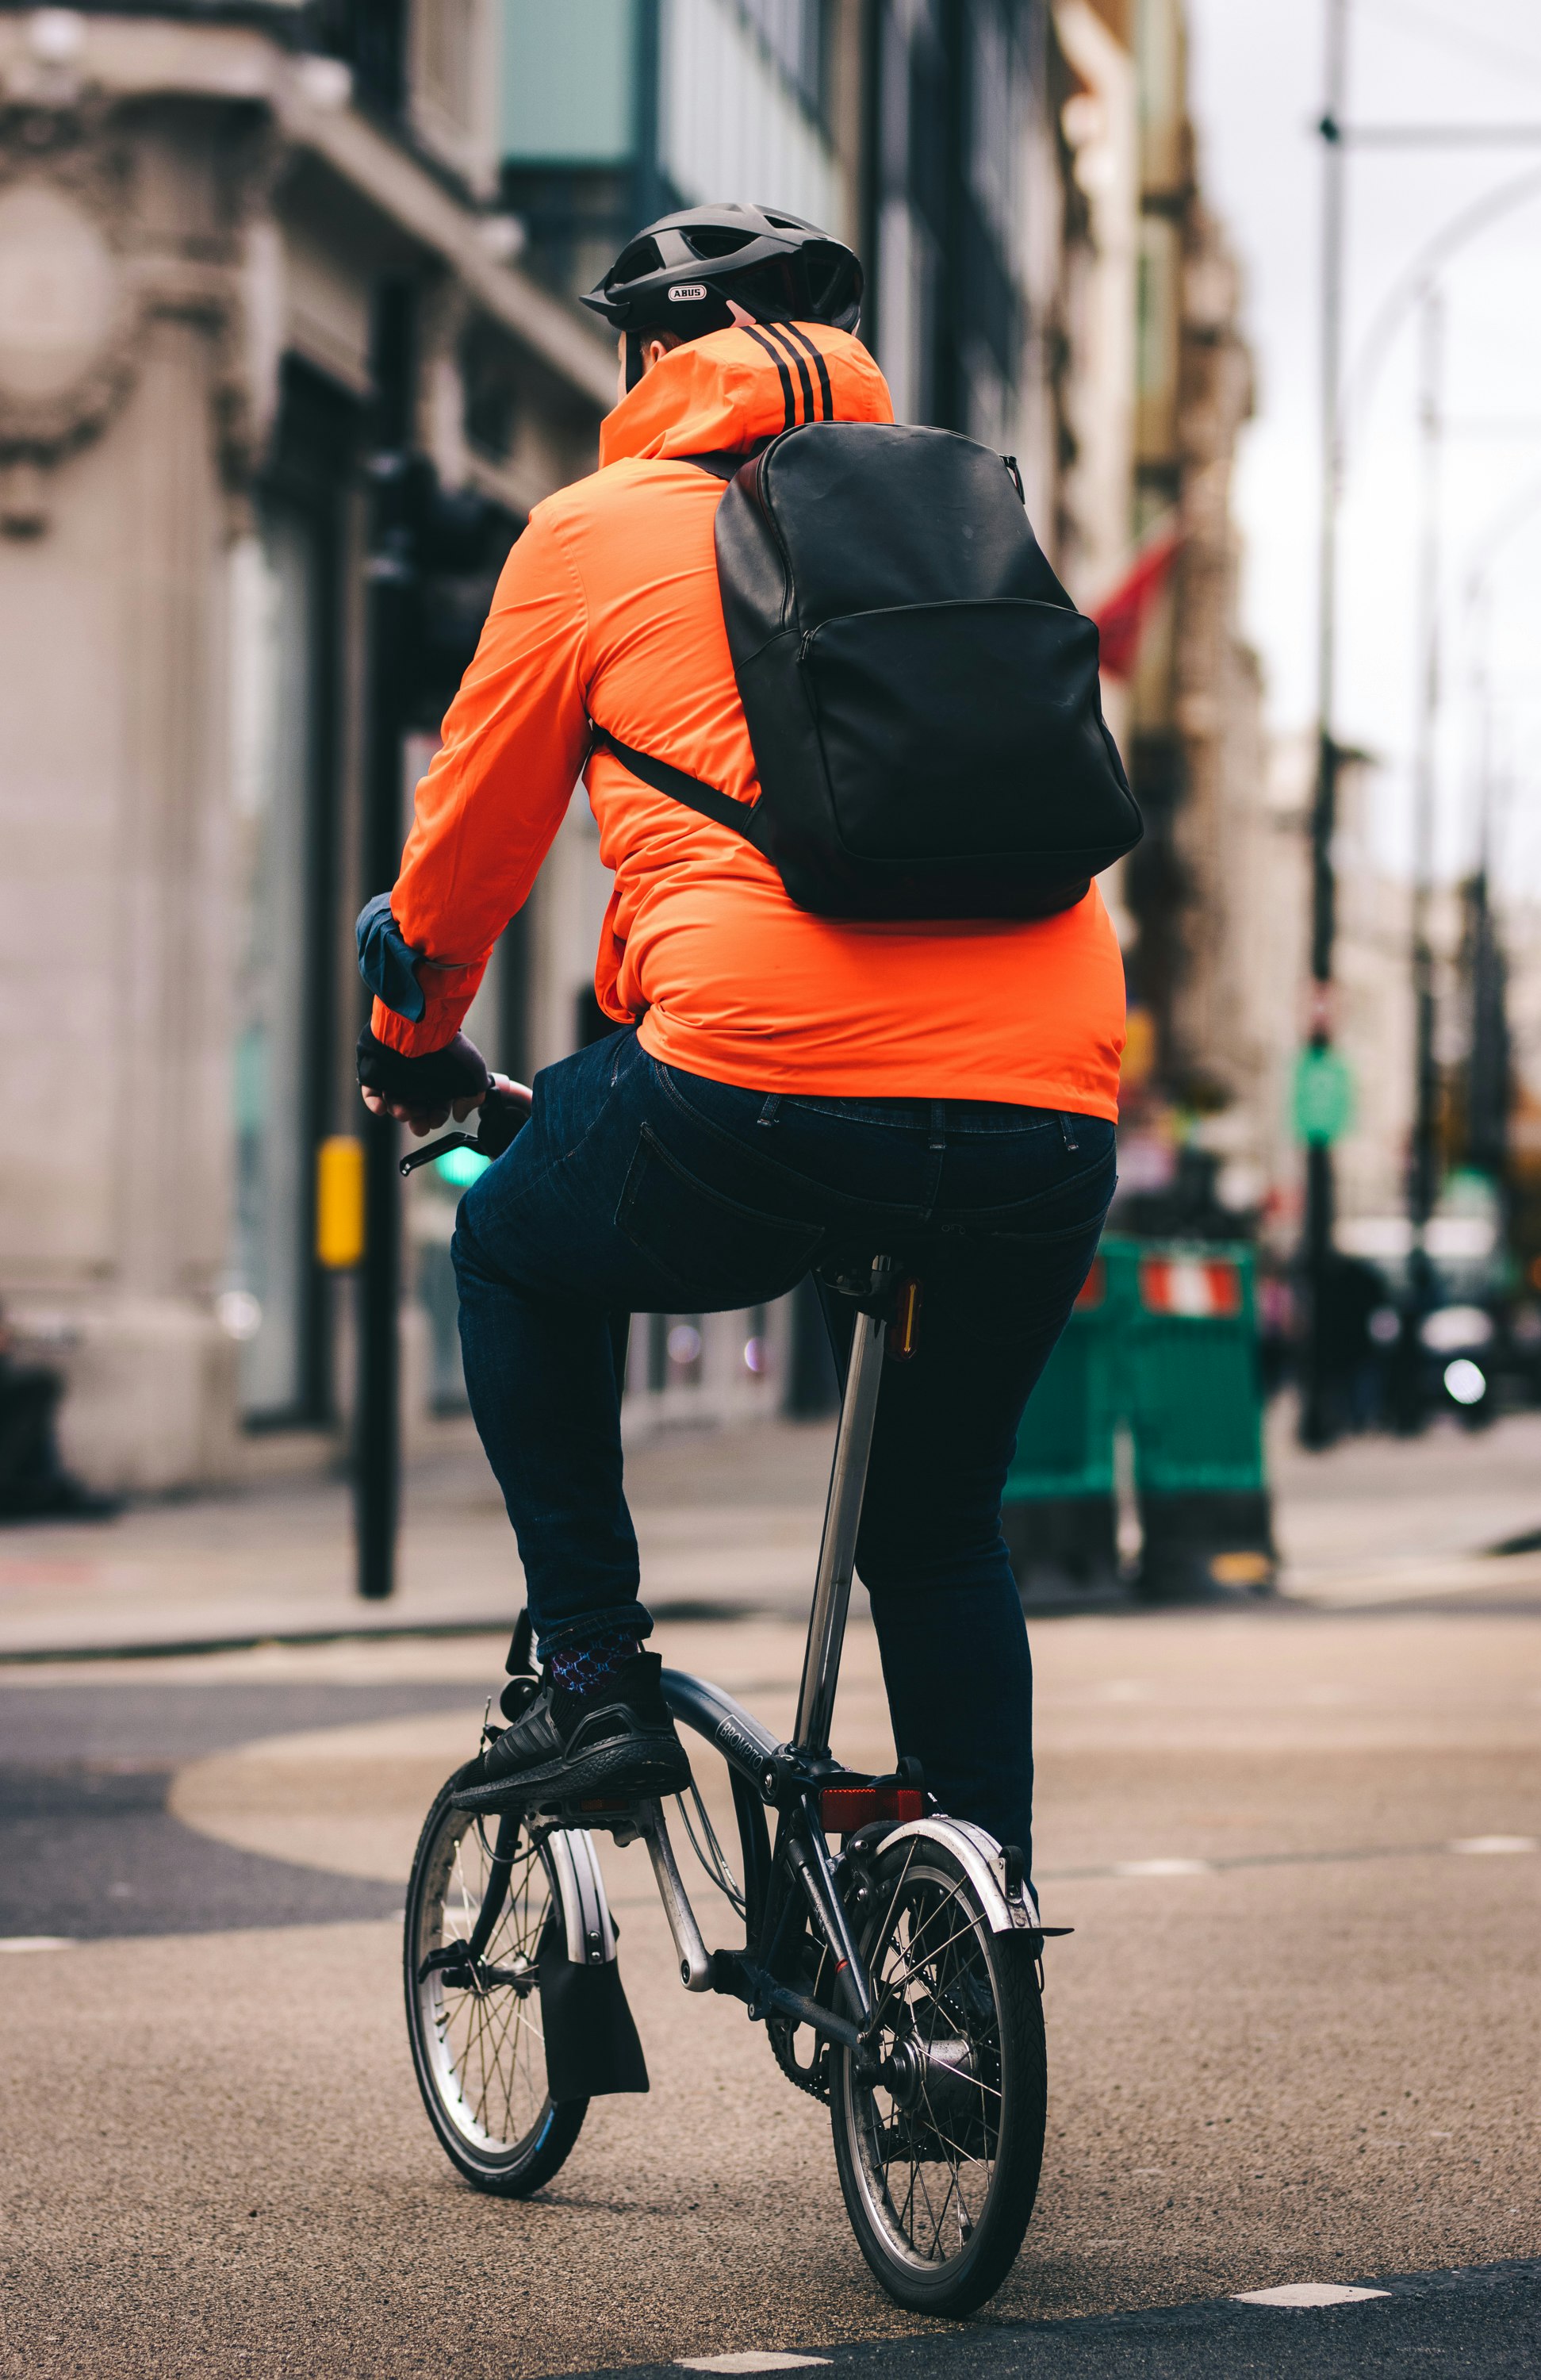 A lone cyclist on their way to work through the city of London down Regents streets